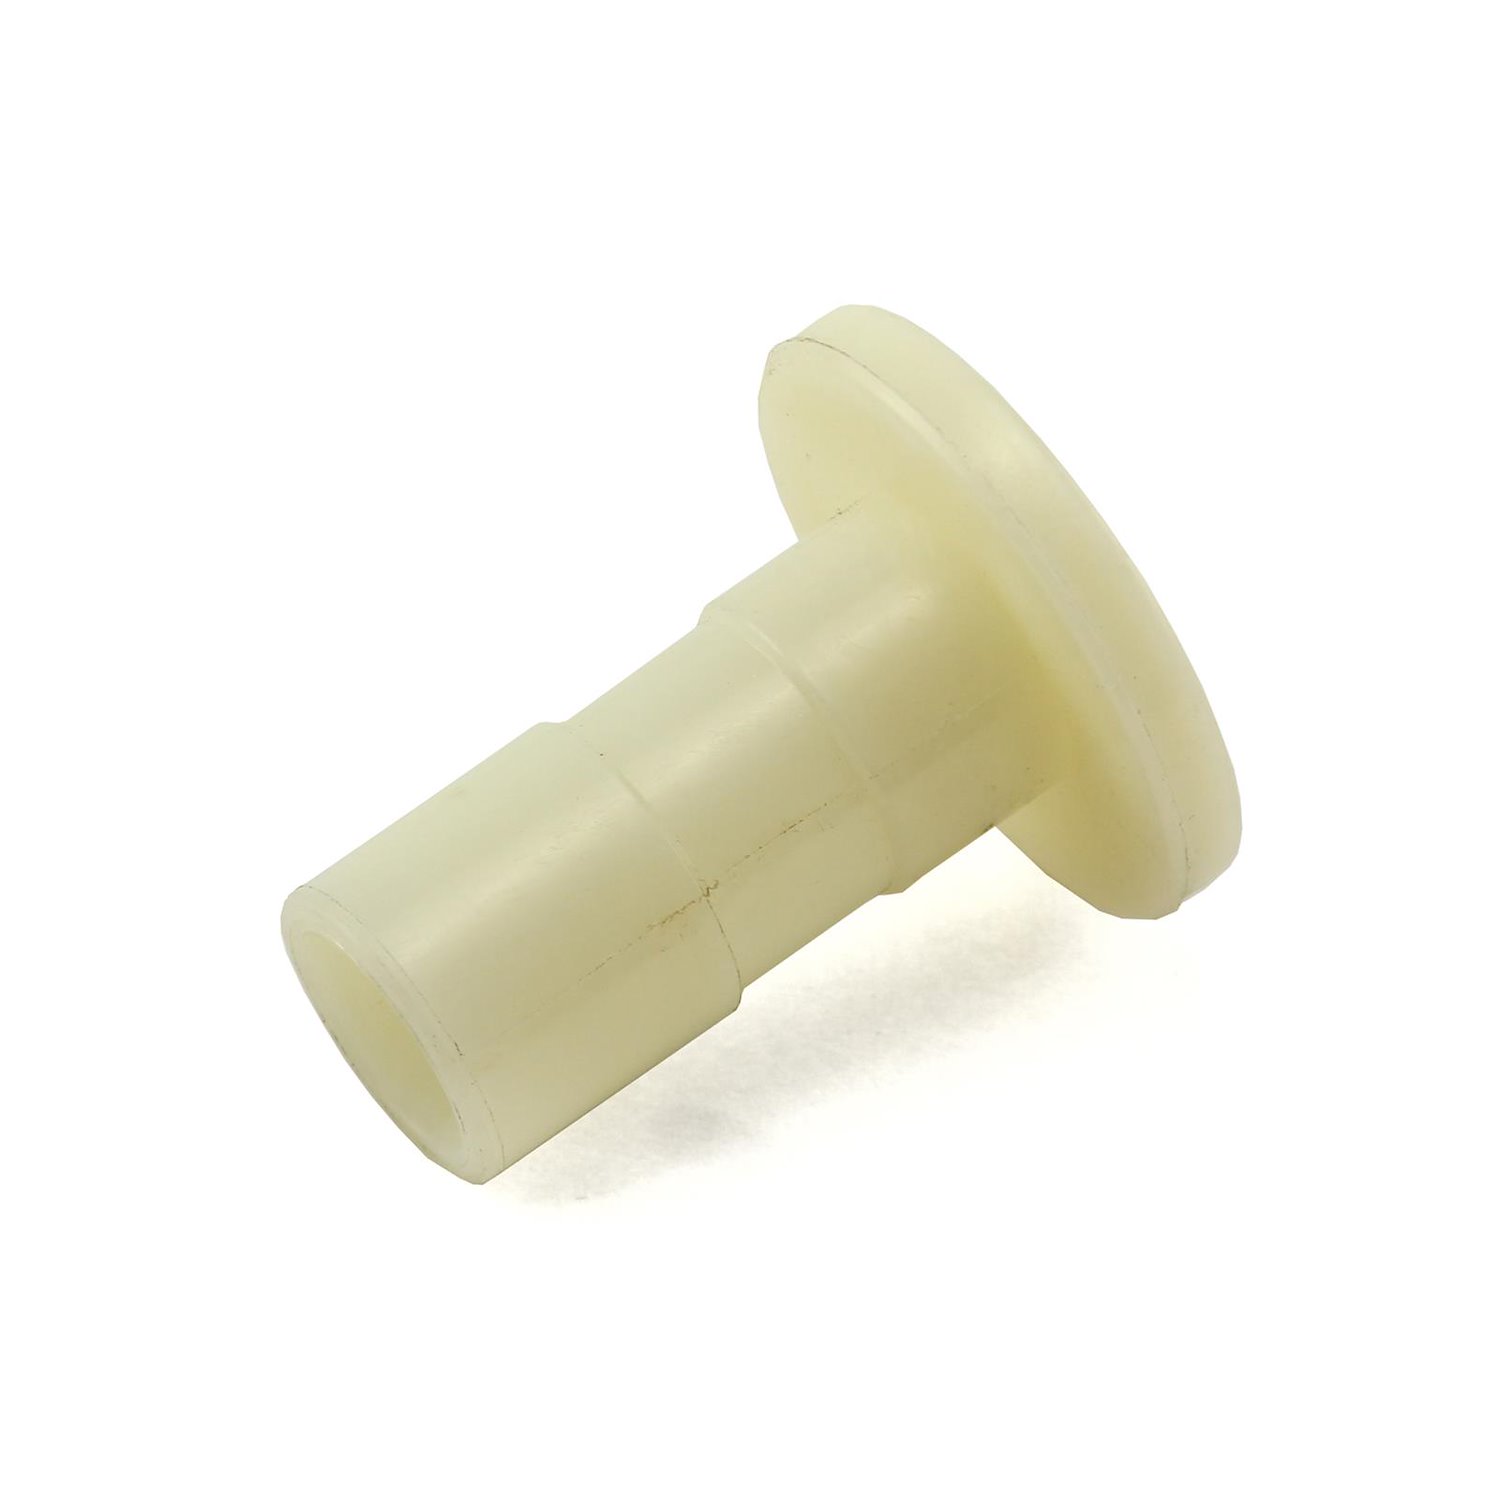 Replacement Bushing For Tds4001 A-Arms